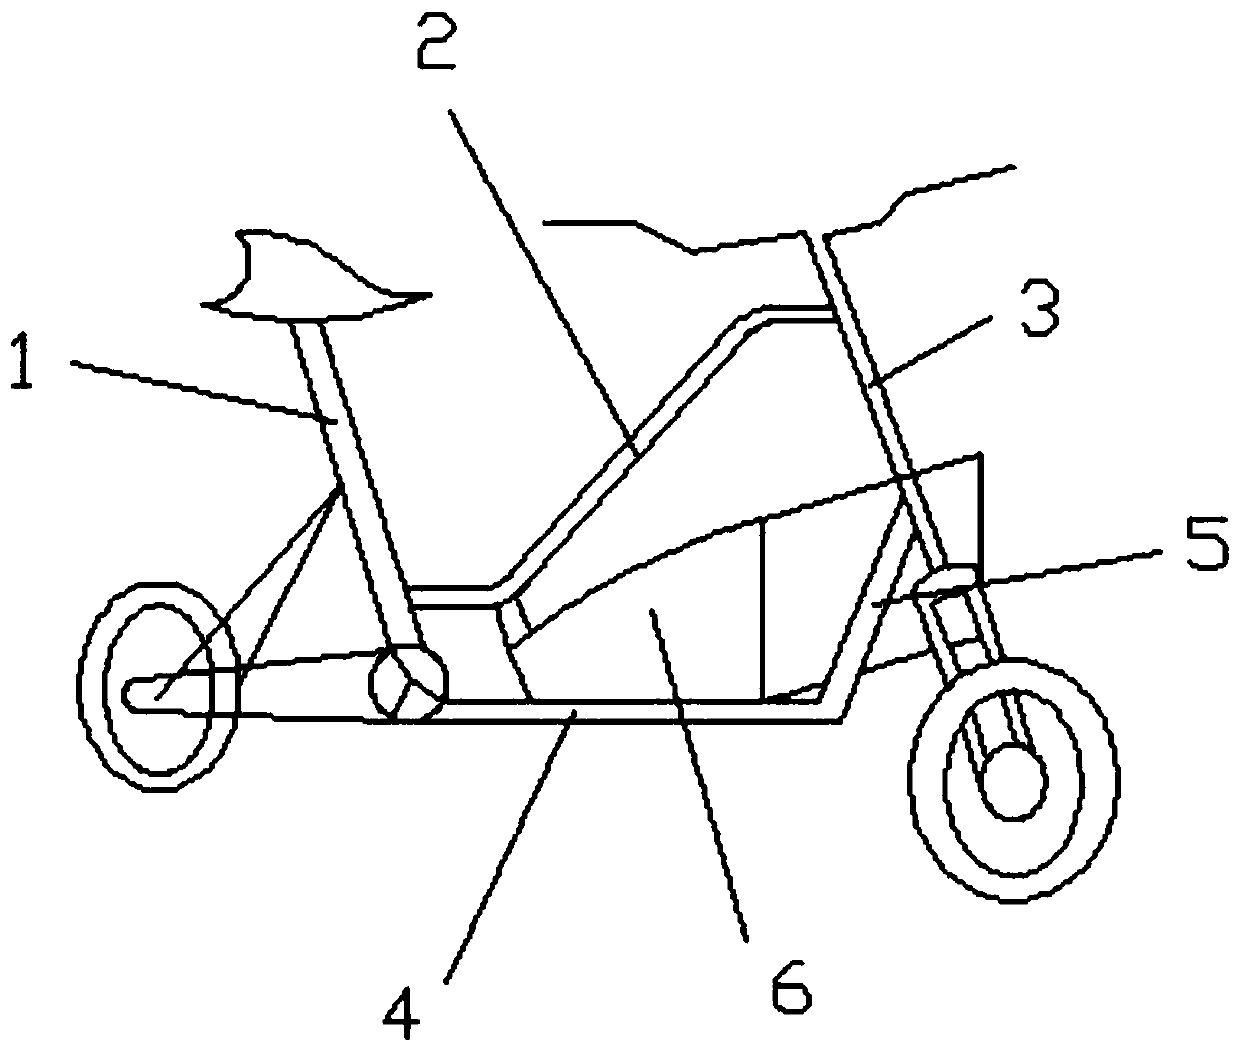 Novel electric bicycle article loading structure